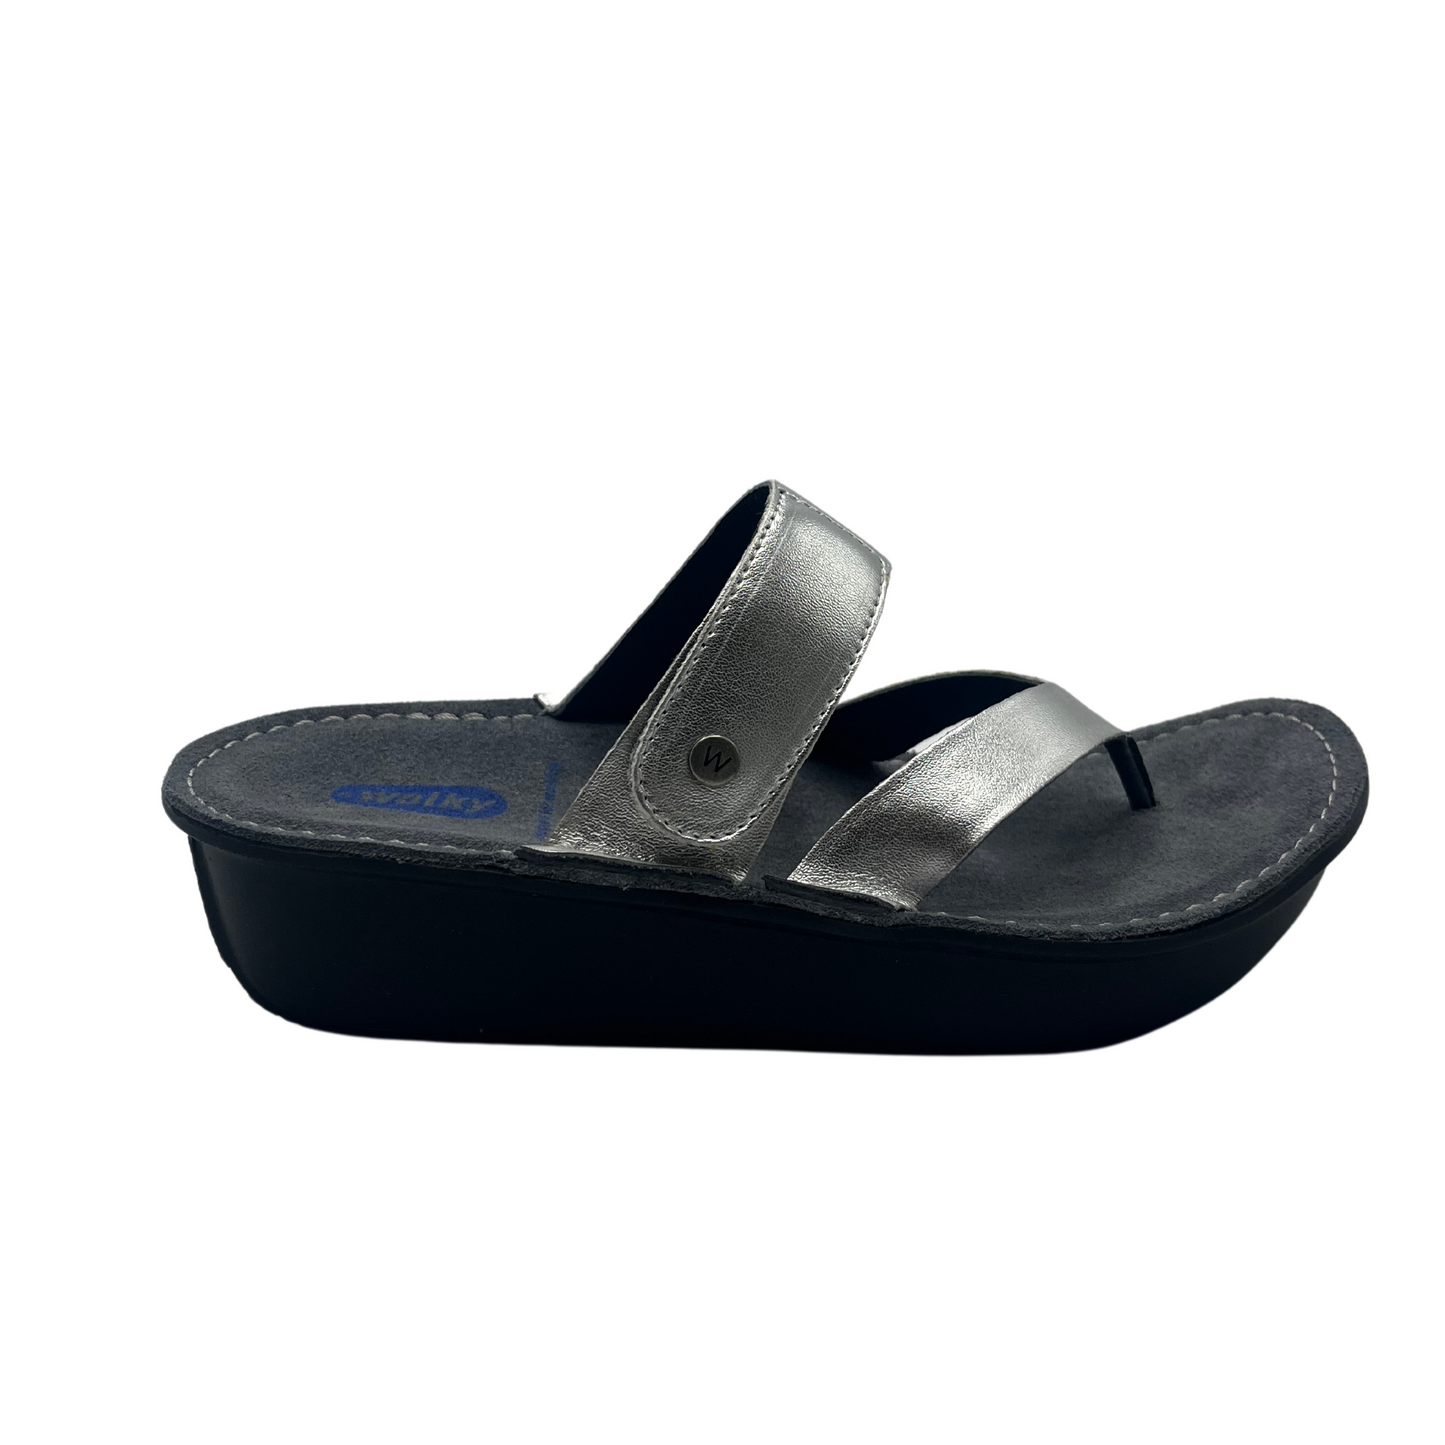 Right facing view of a metallic silver sandal with a wedge heel and an adjustable strap